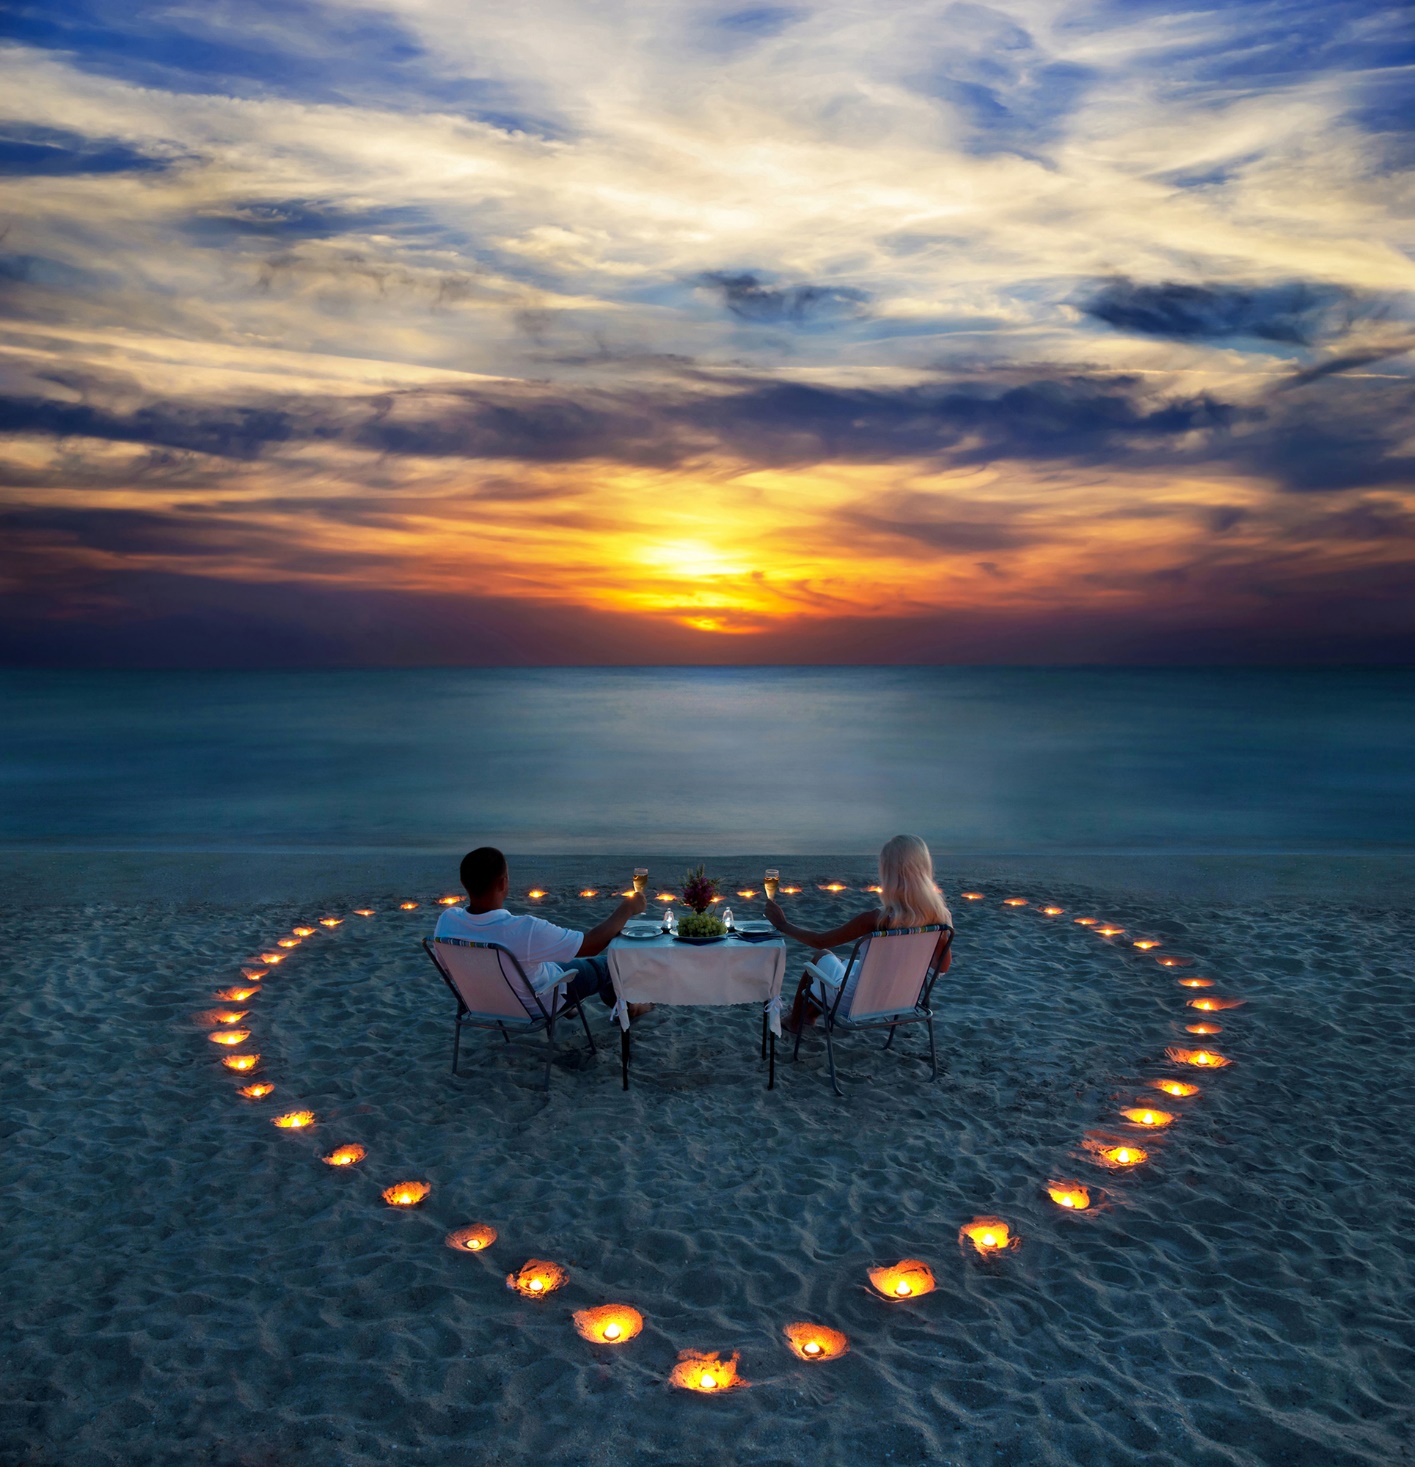 A couple sitting at a table on a beach with candles in the shape of a heart

Description automatically generated